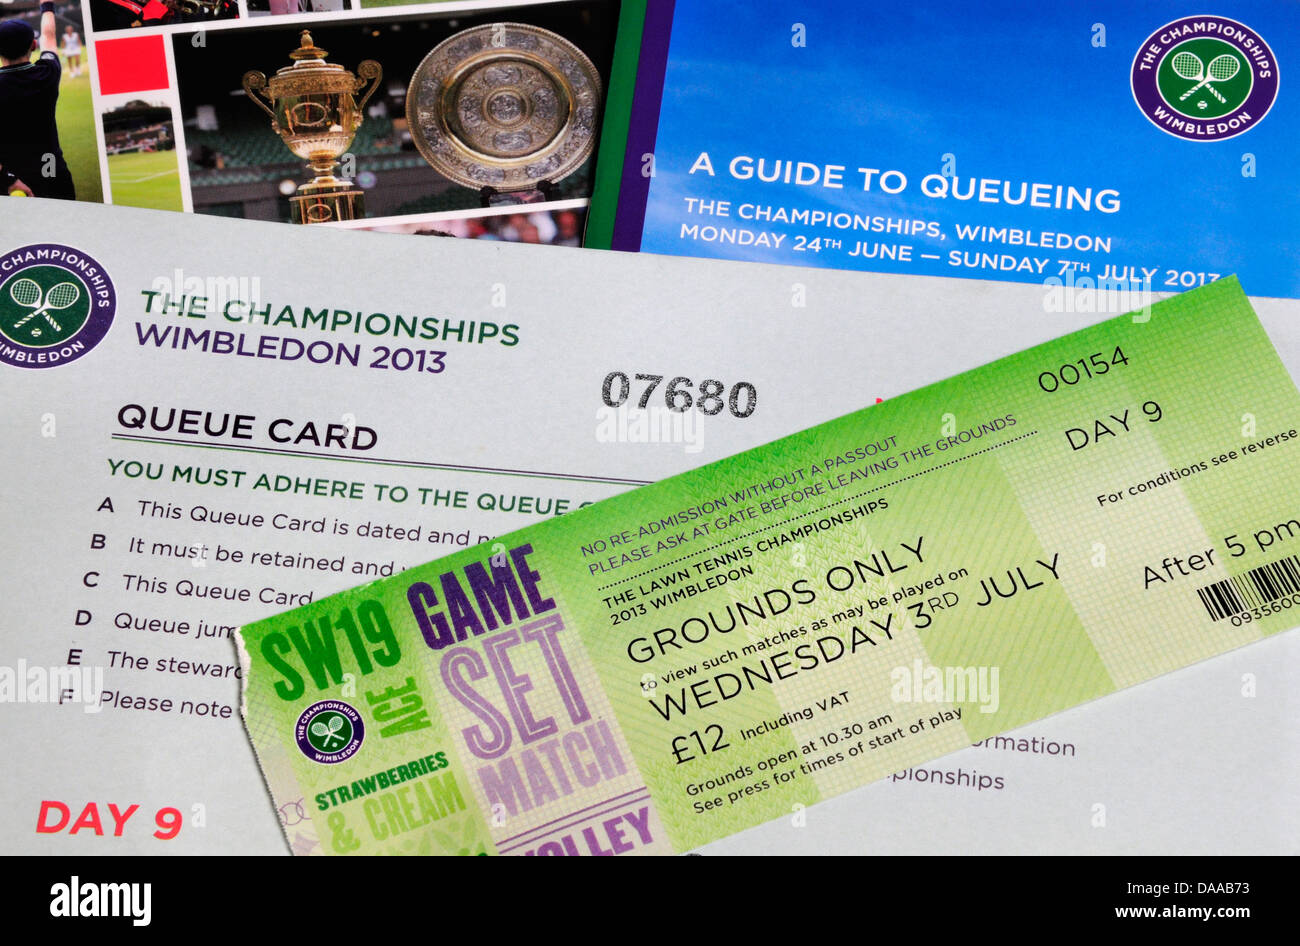 Wimbledon 2013 ticket (Ground pass, after 5pm), queue card and guide to queuing Stock Photo